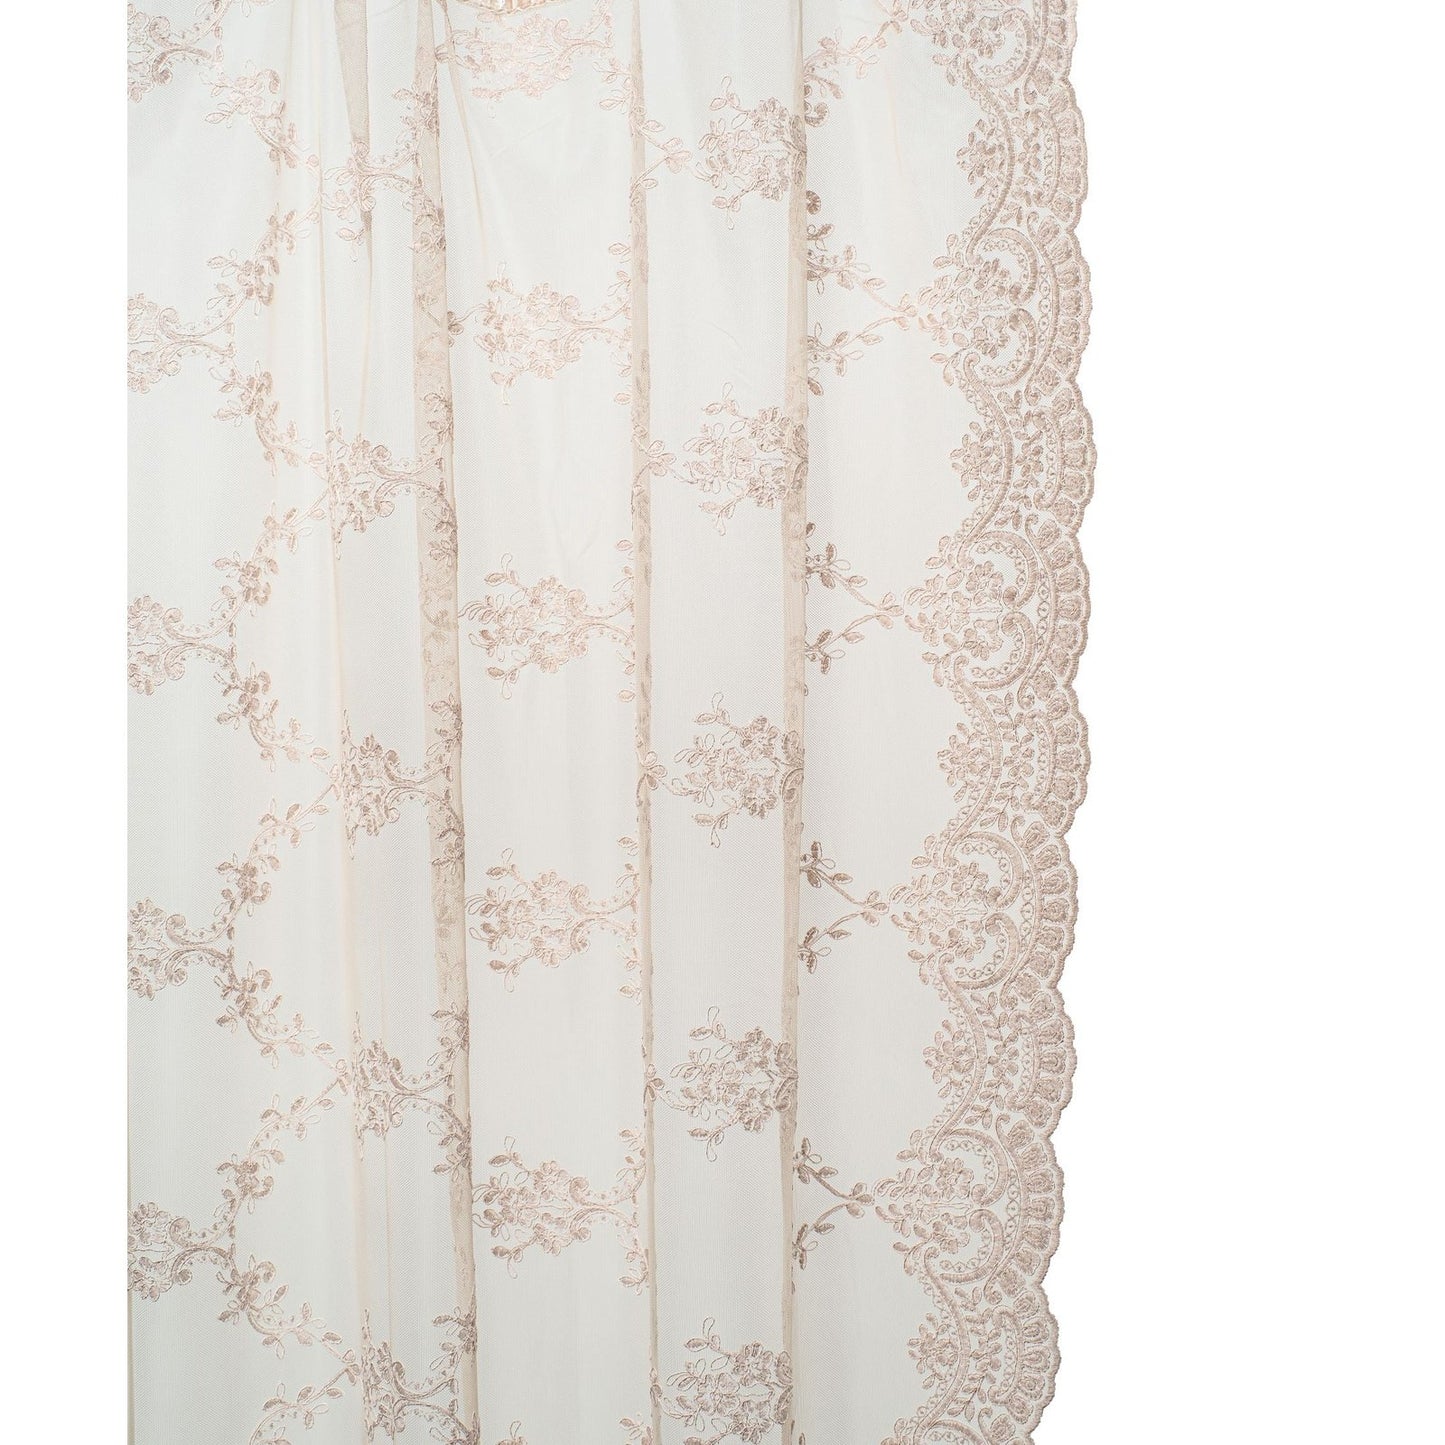 Scalloped edges and velvet ribbon add a touch of elegance to the Amelia Lace Curtain.